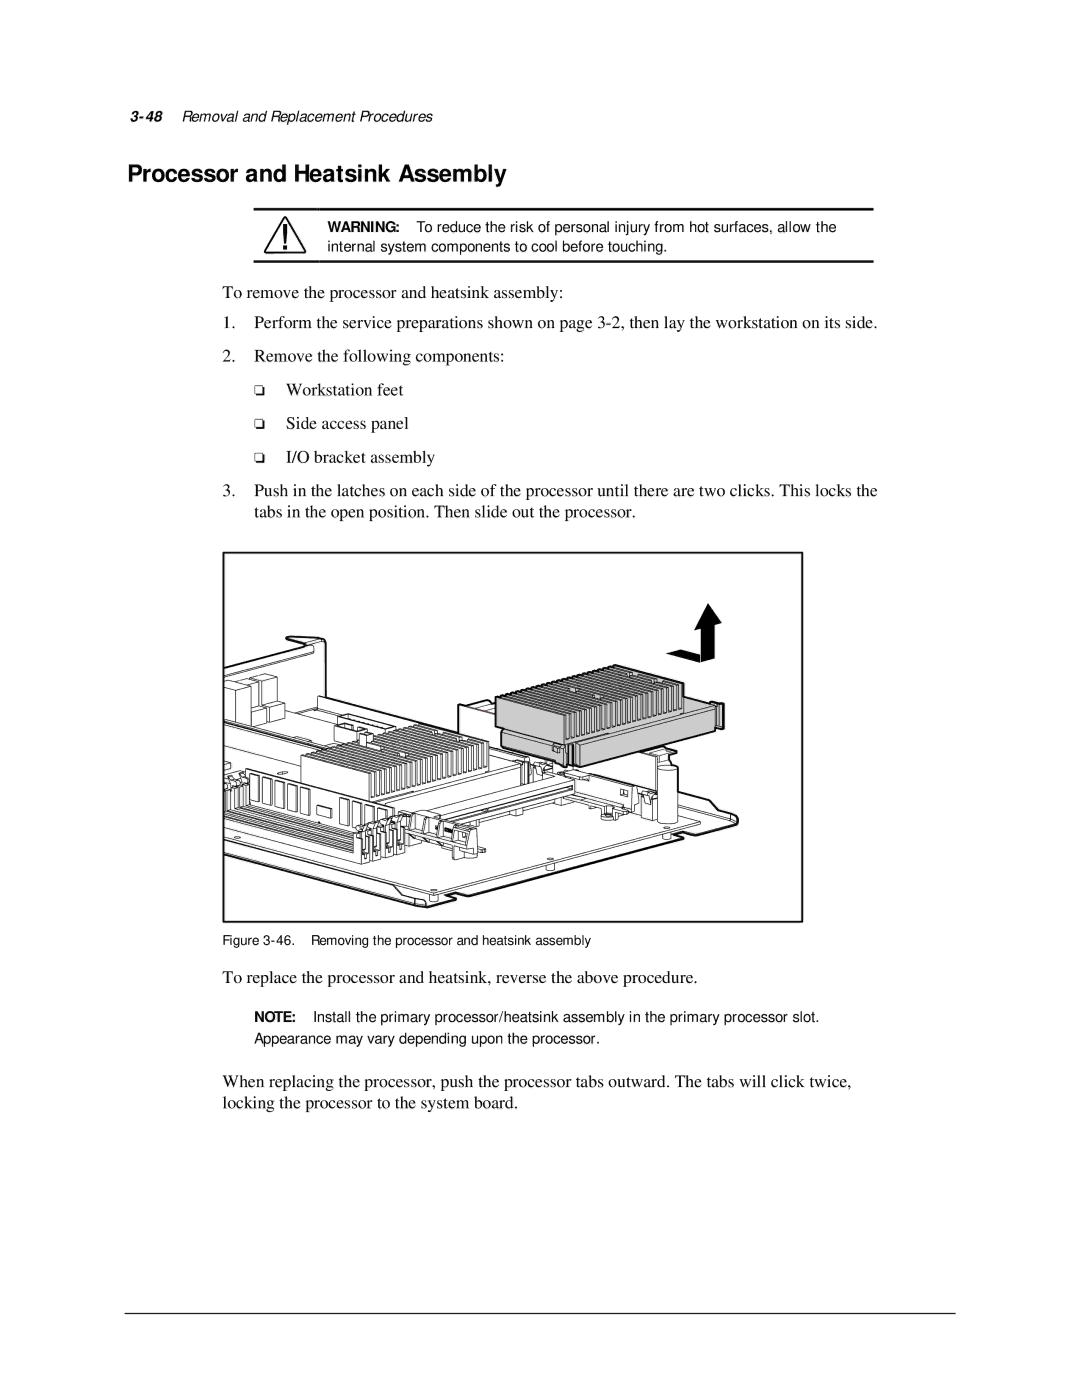 Compaq AP500 manual Processor and Heatsink Assembly, 48Removal and Replacement Procedures 